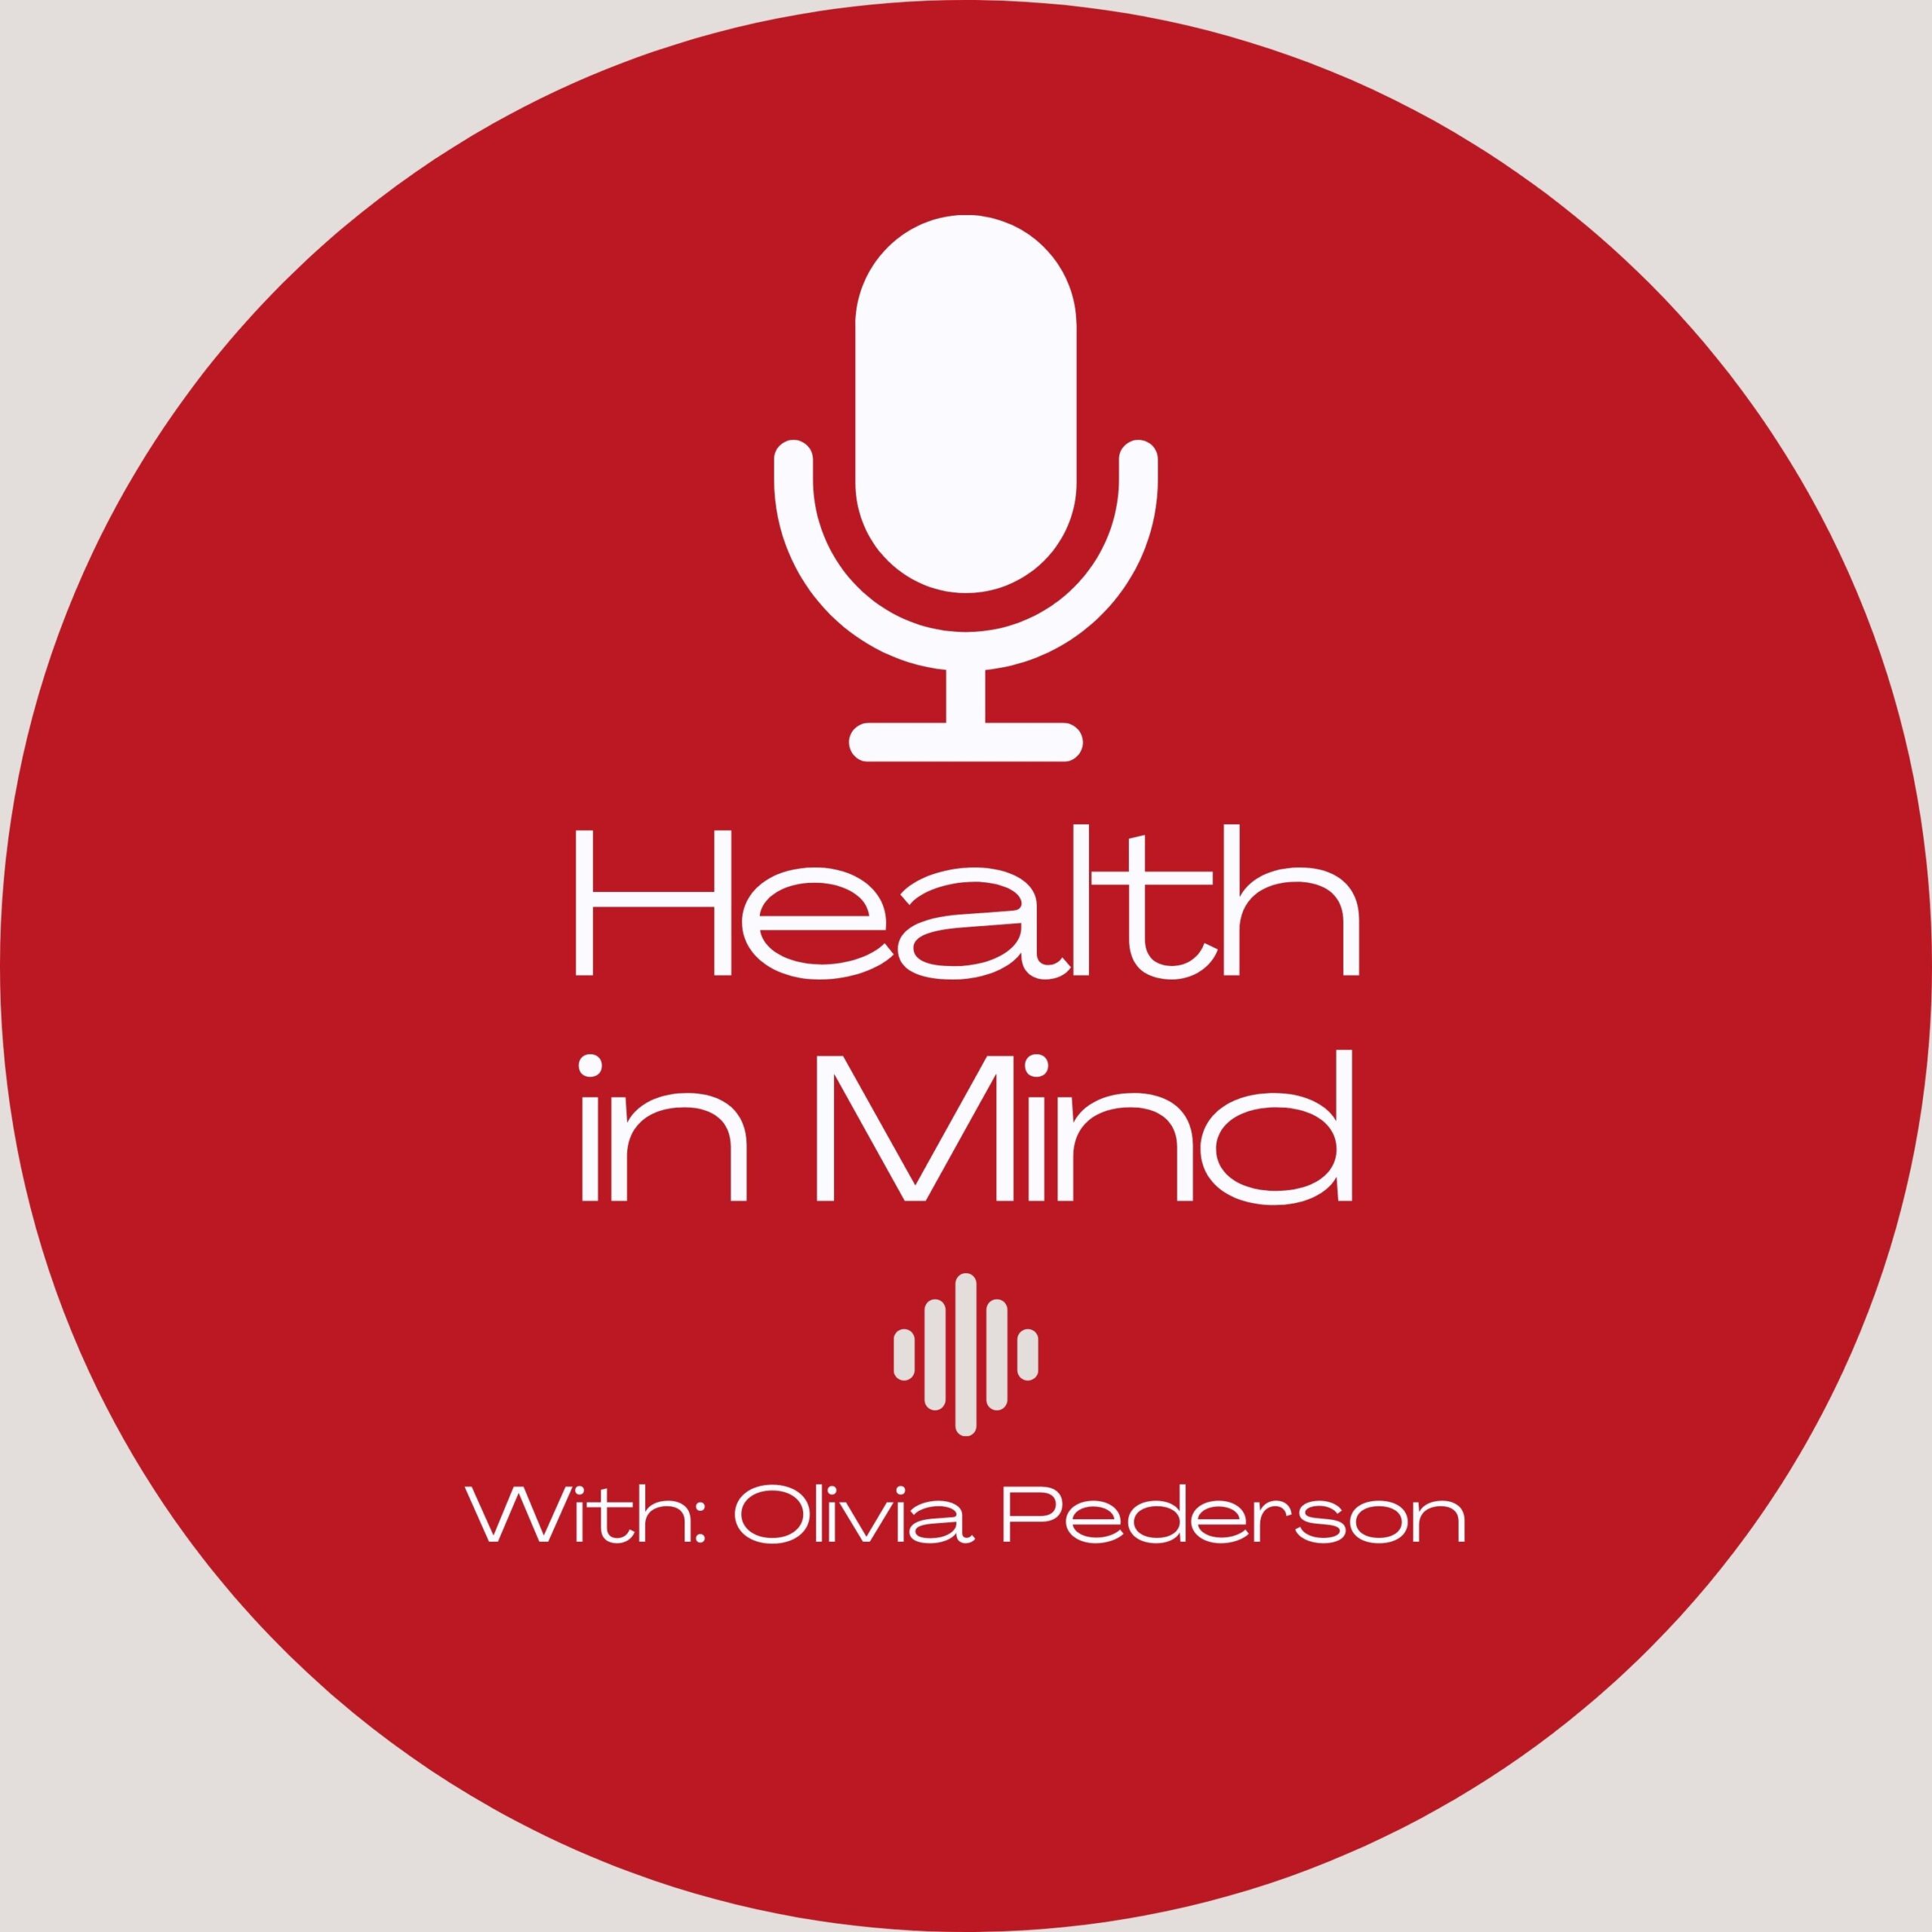 Health in Mind with Olivia Pederson